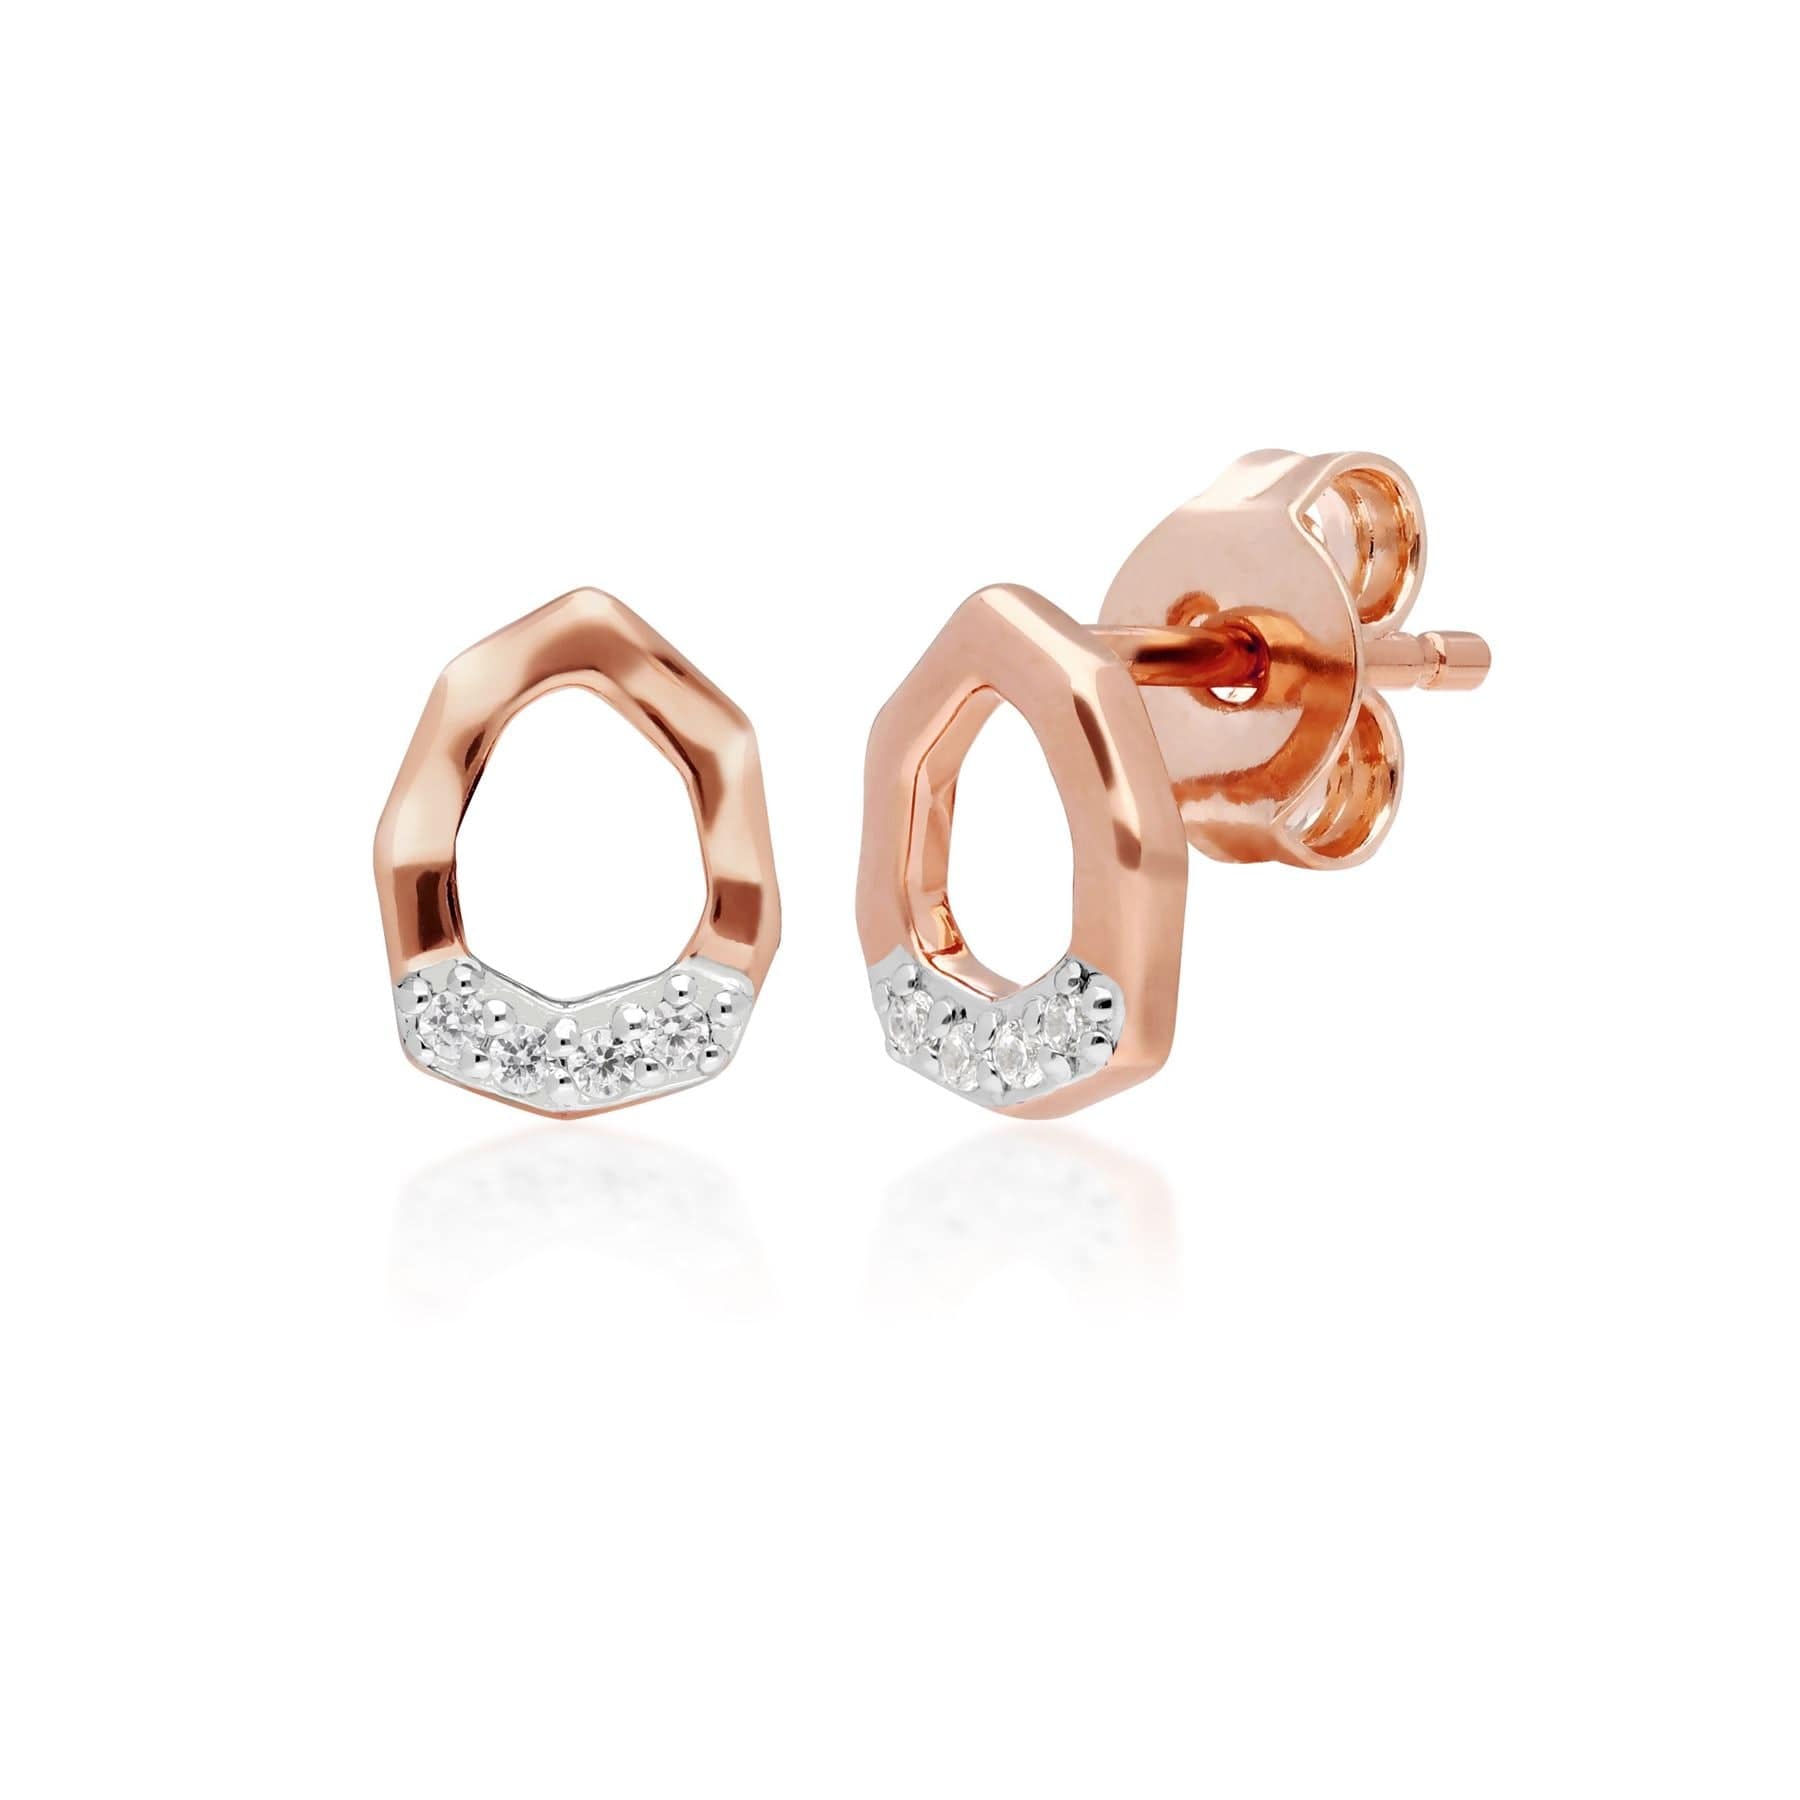 Image of Diamond Pave Asymmetric Stud Earrings in 9ct Rose Gold